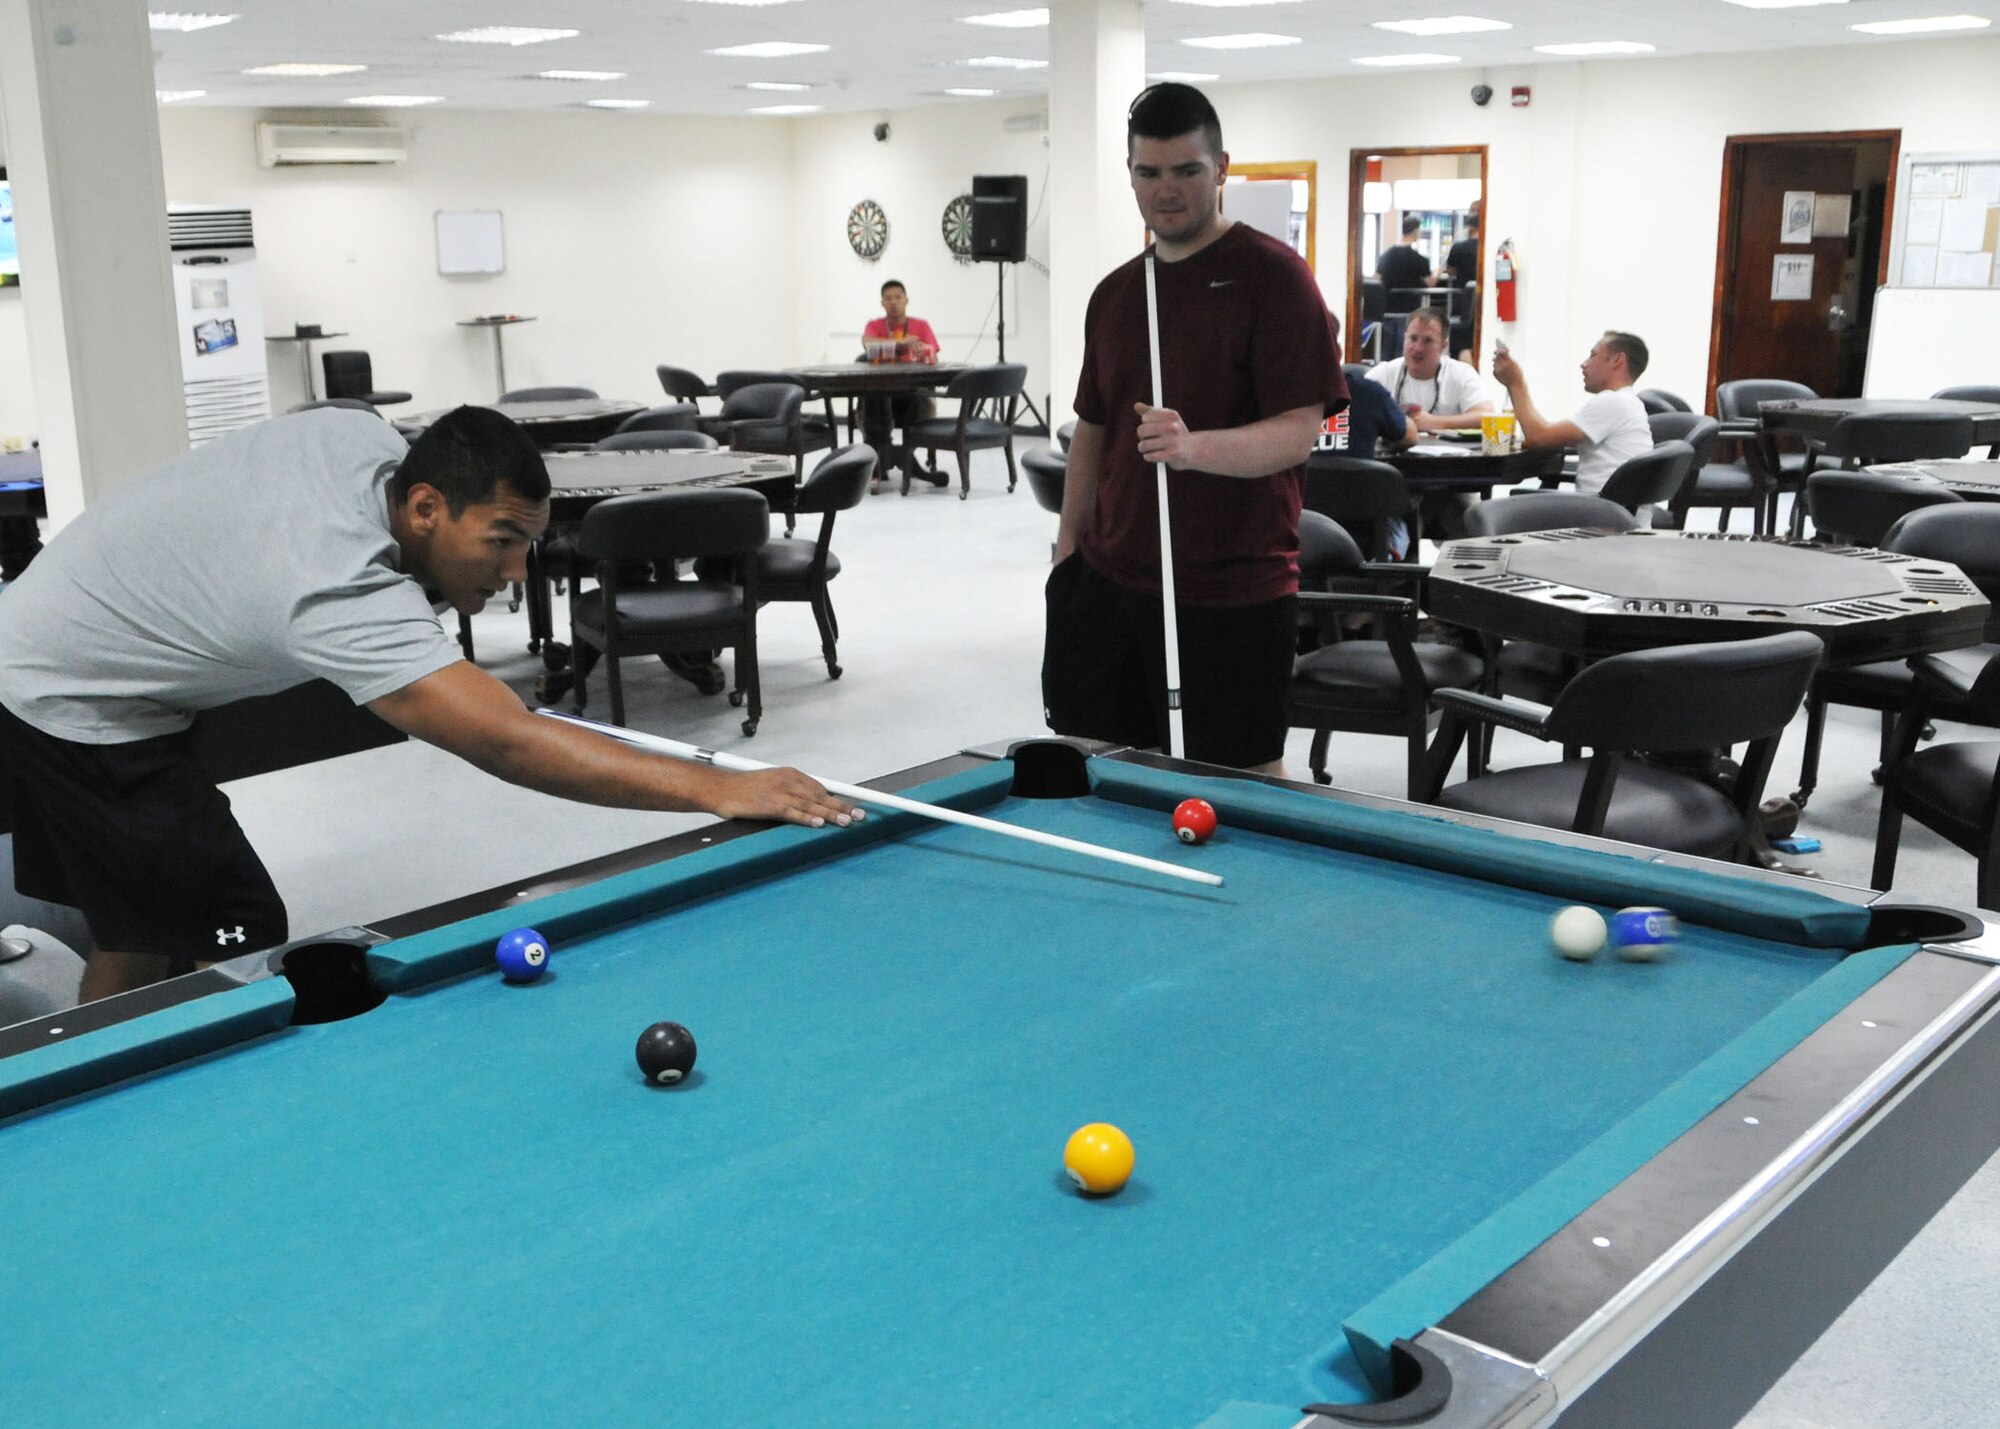 Air Force Senior Airman Troy Marquez shoots the 10 ball into the corner pocket during a game of pool with Staff Sgt. Jarriott Bennett at the 380th Air Expeditionary Wing’s community activities center at an undisclosed location of Southwest Asia June 1, 2014. (U.S. Air Force photo by Senior Master Sgt. Eric Peterson/Released)